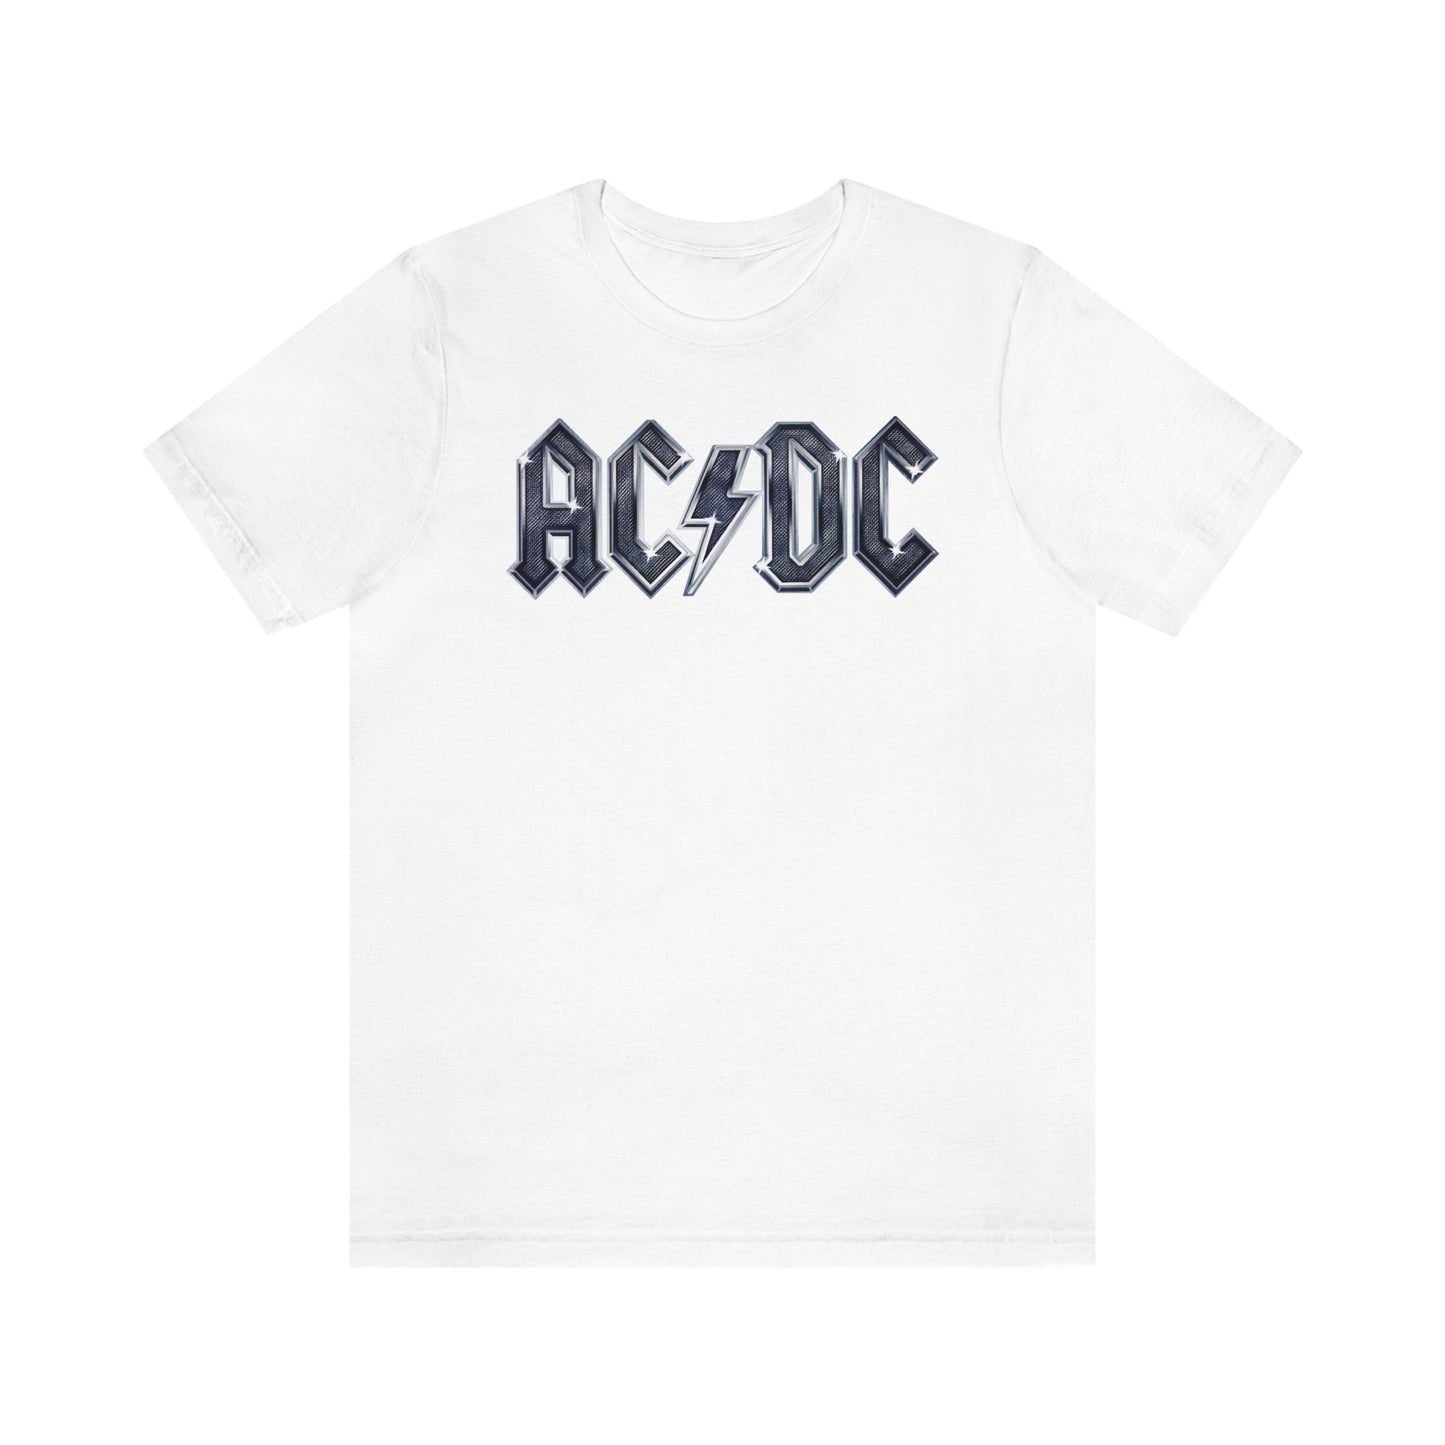 AC-DC Back In Black Album Adult Shirt, ACDC Neon Highway To Hell Rock and Roll Music Shirt